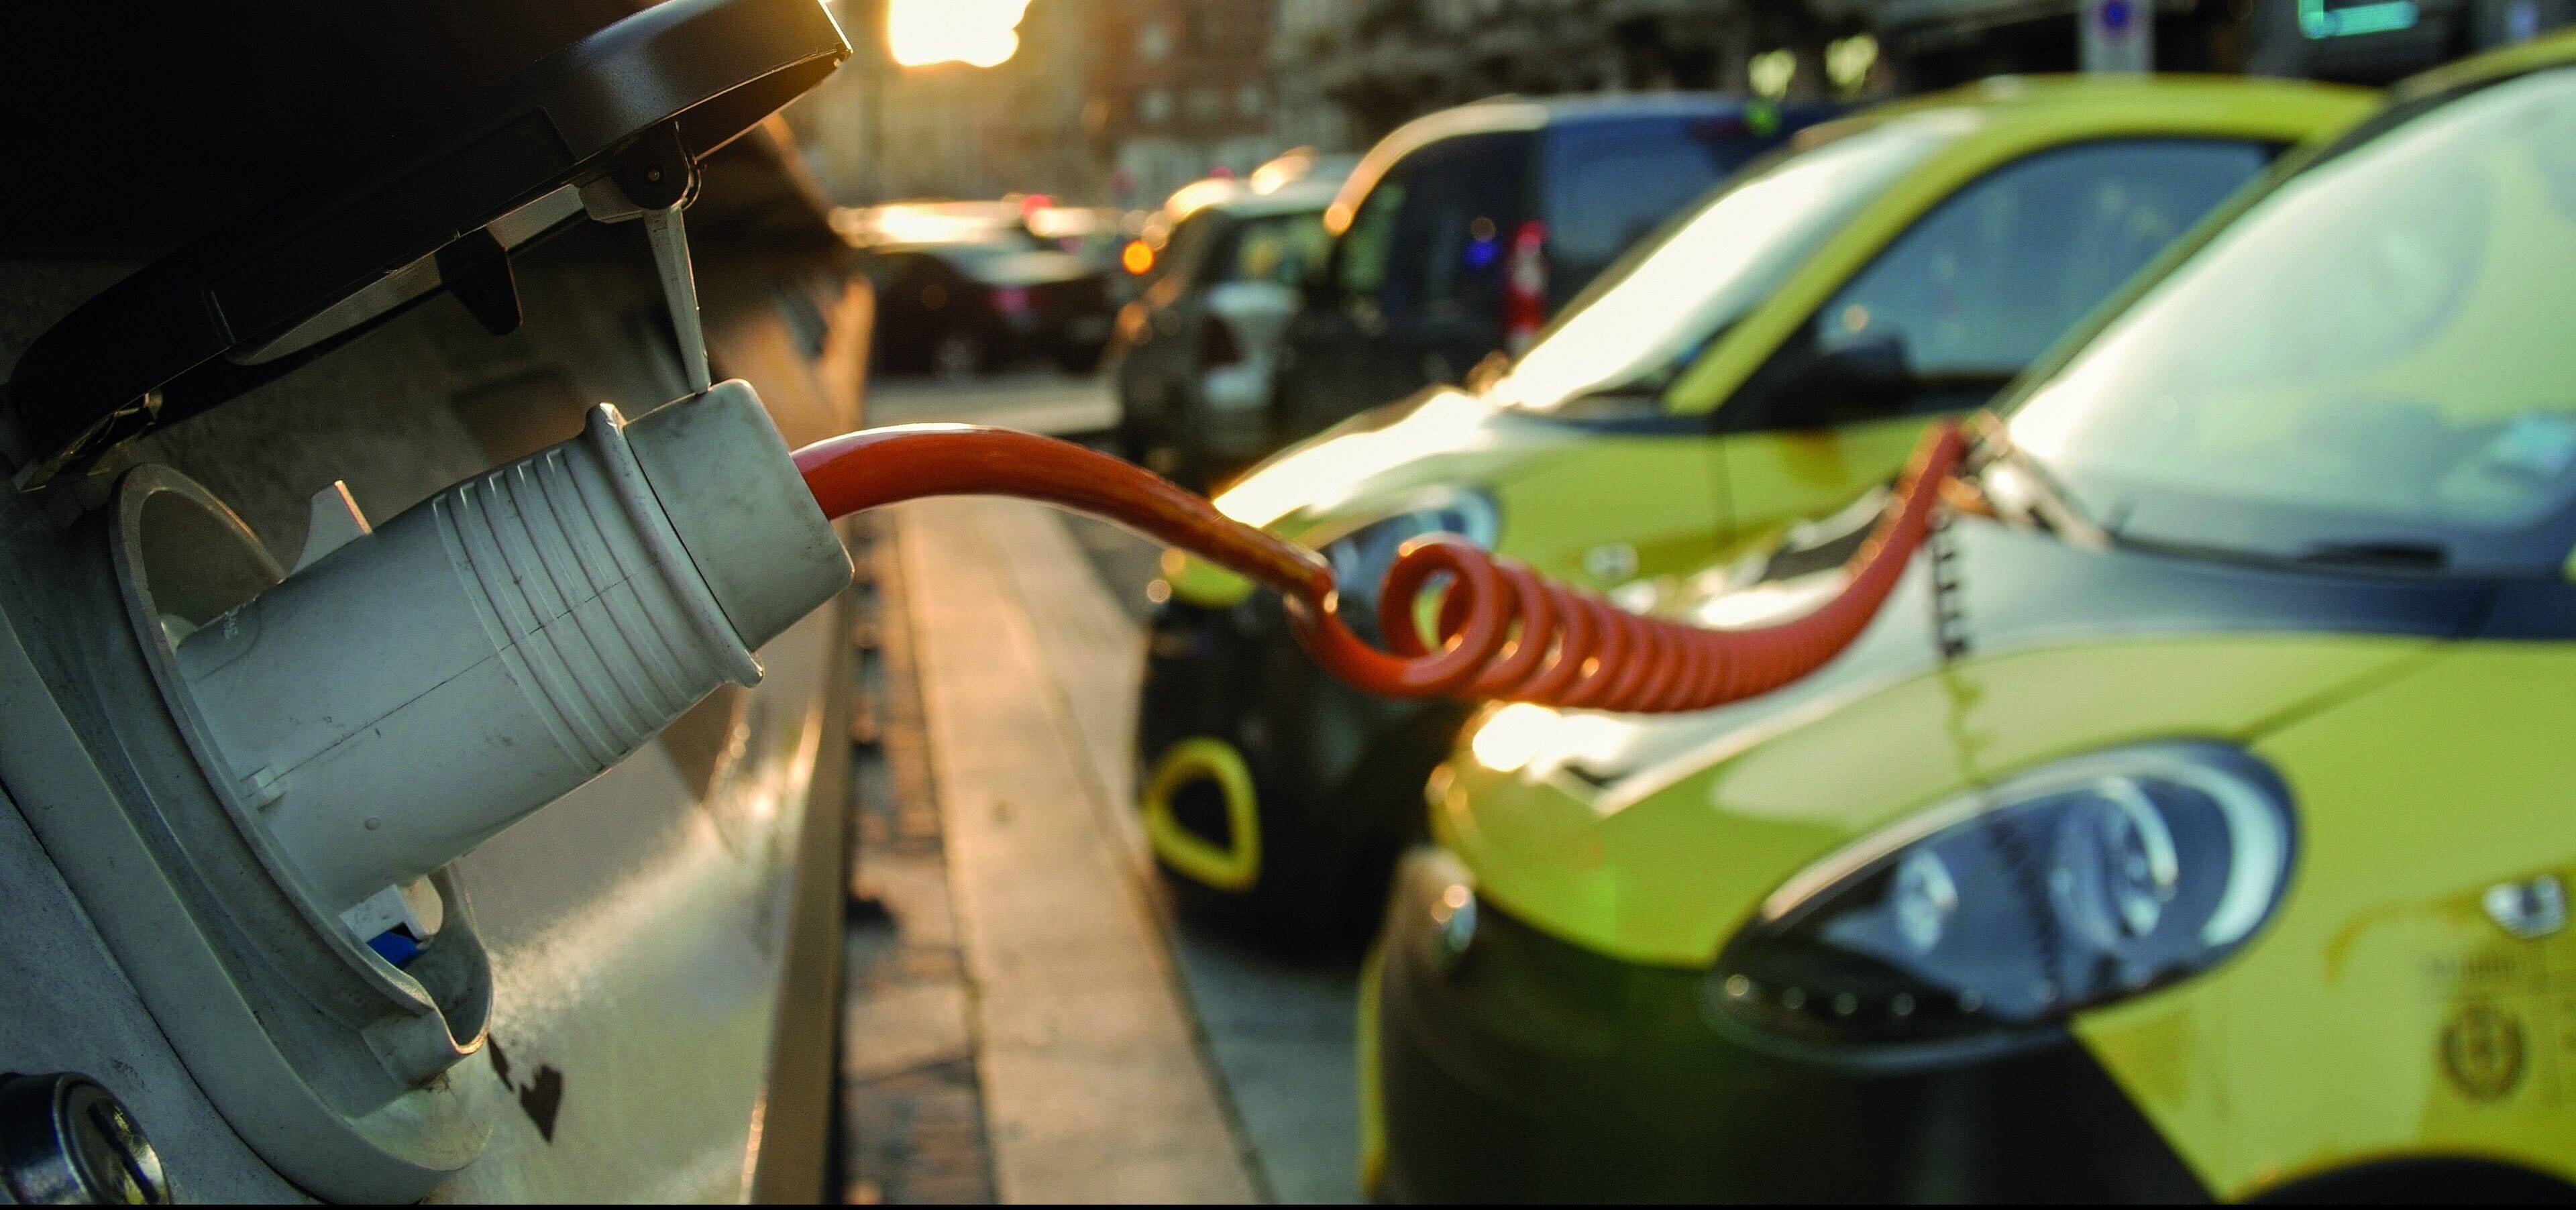 ‘Significant acceleration’ of EV charge point rollout